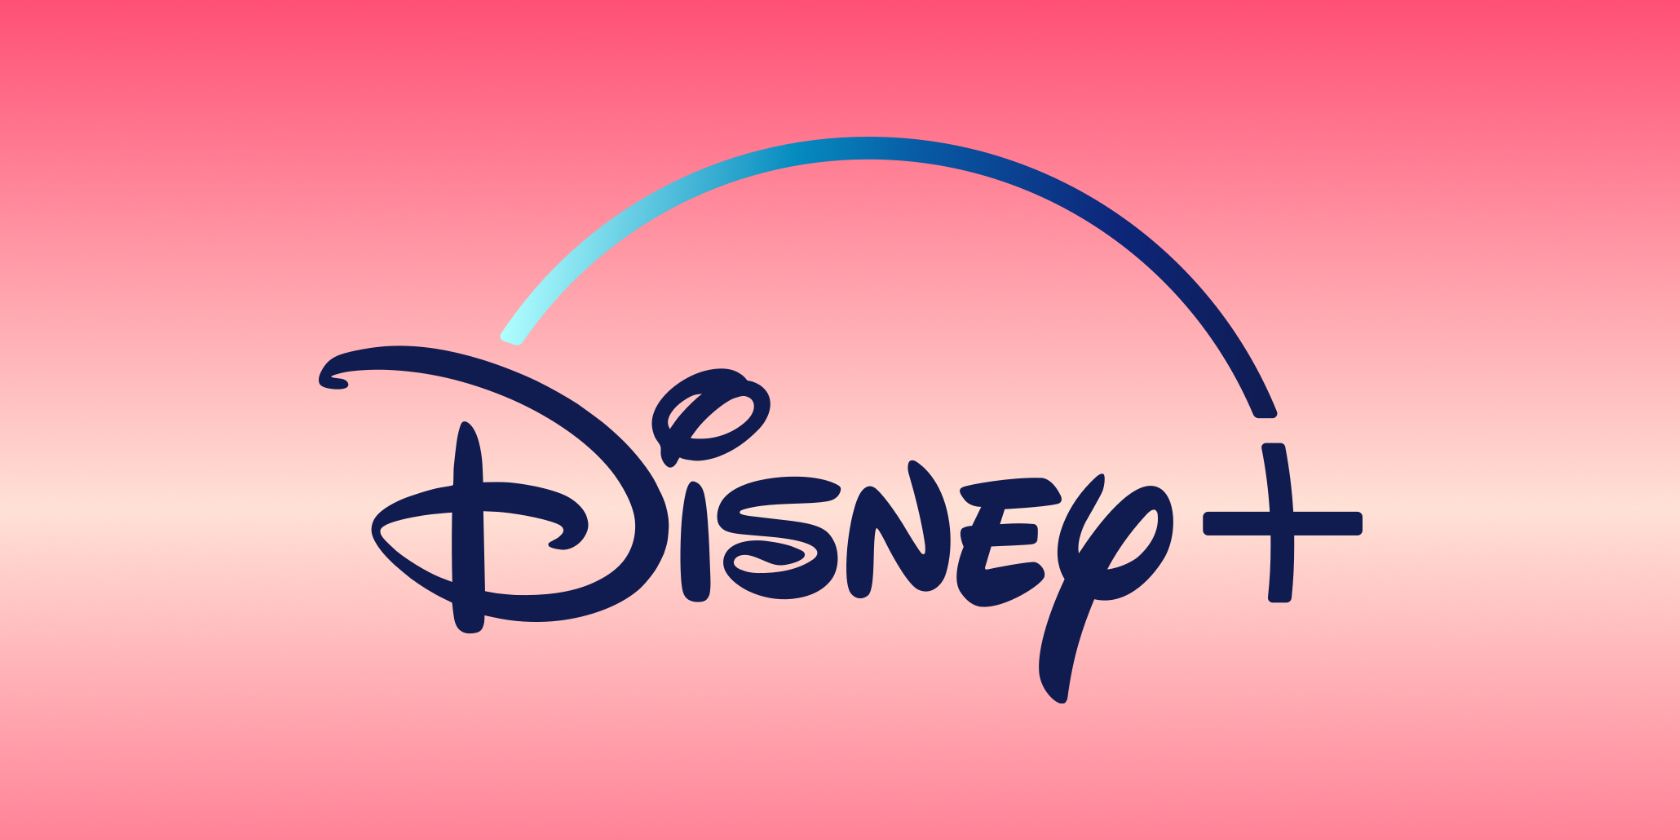 The disney+ logo on a pink gradient background